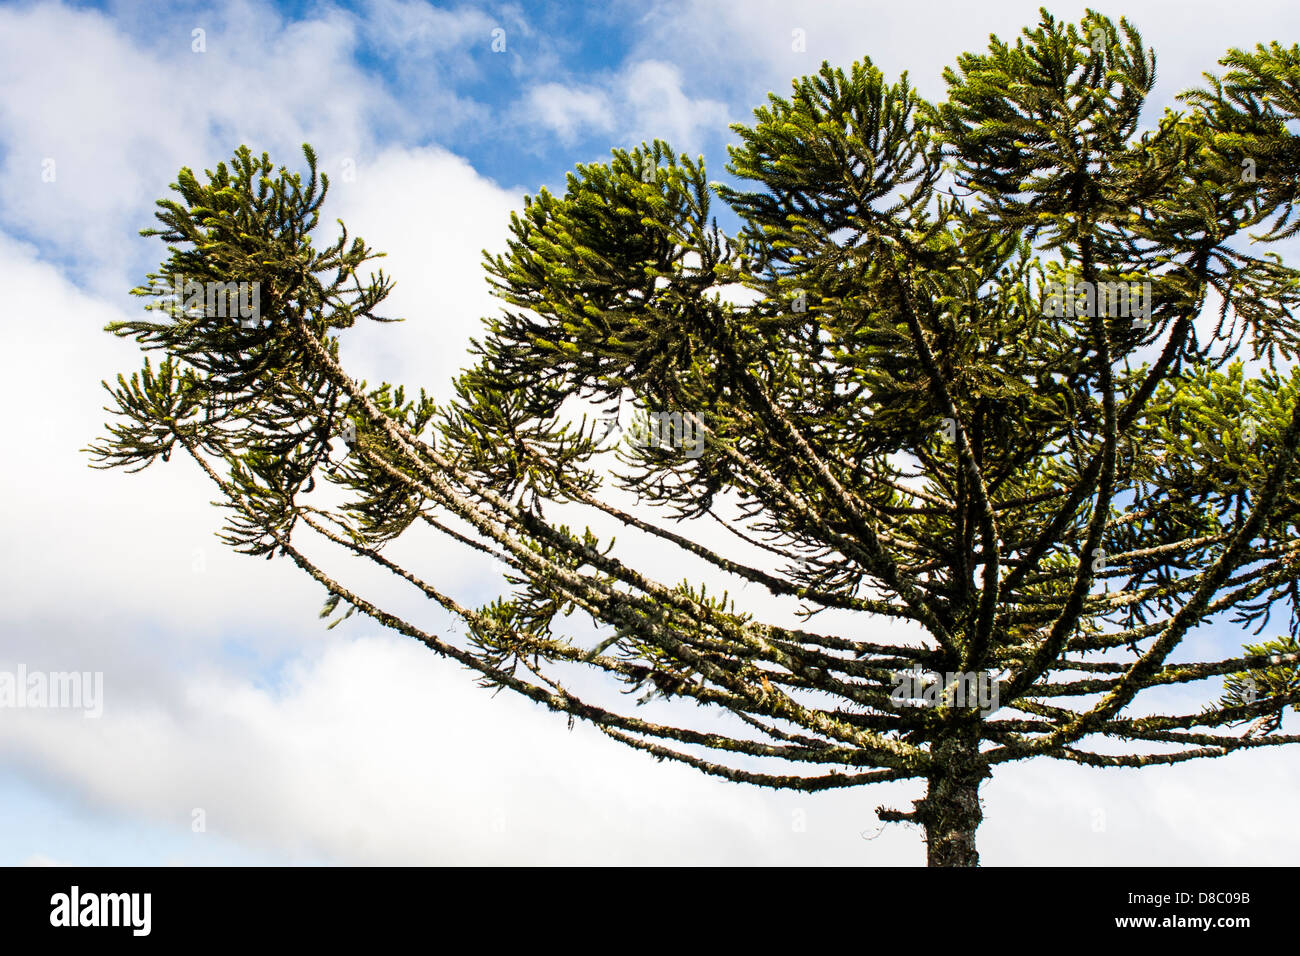 Araucaria (Araucaria angustifolia), a typical pine tree from southern Brazil. Stock Photo